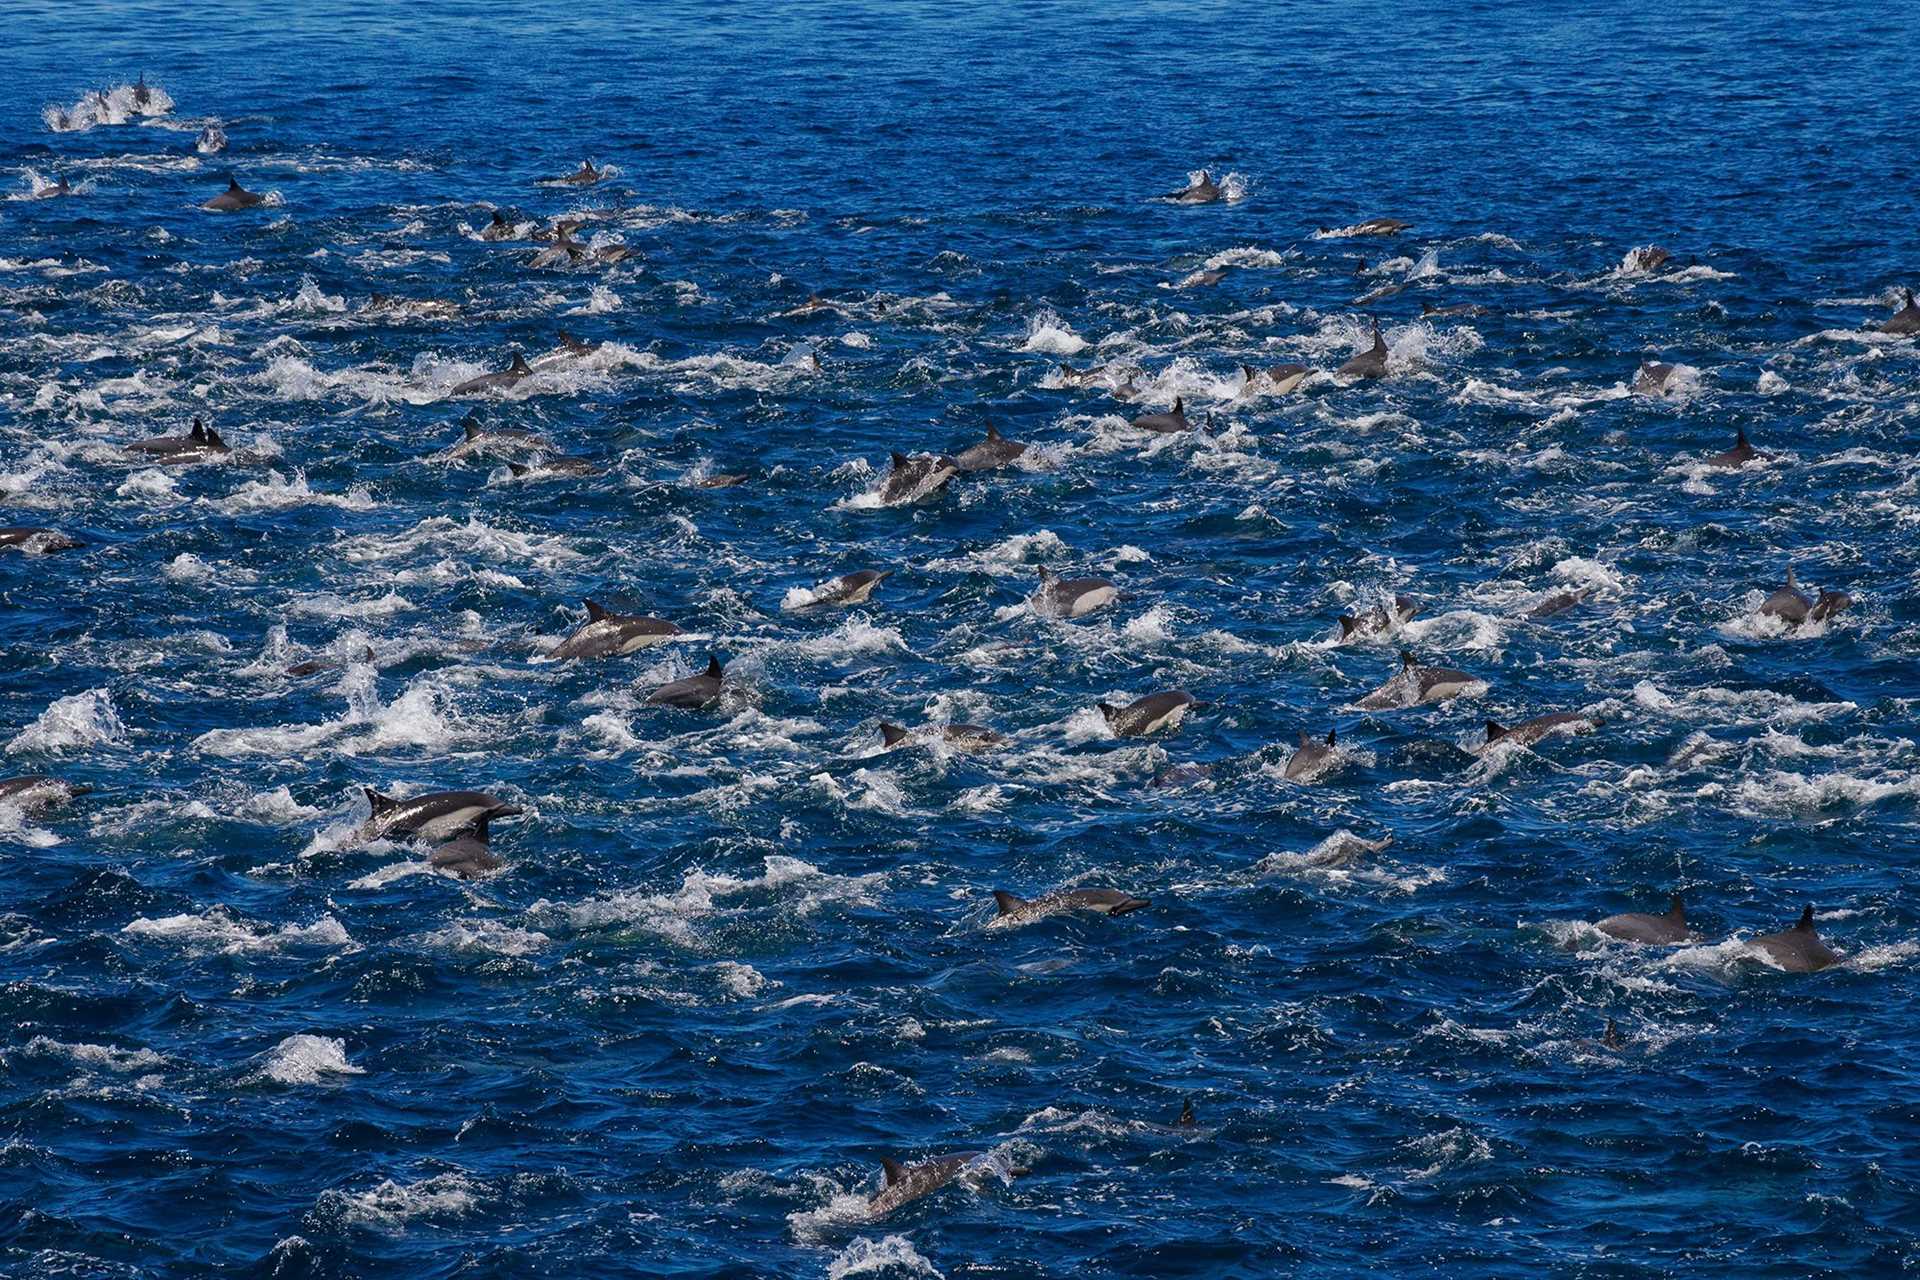 thousands of dolphins in the water